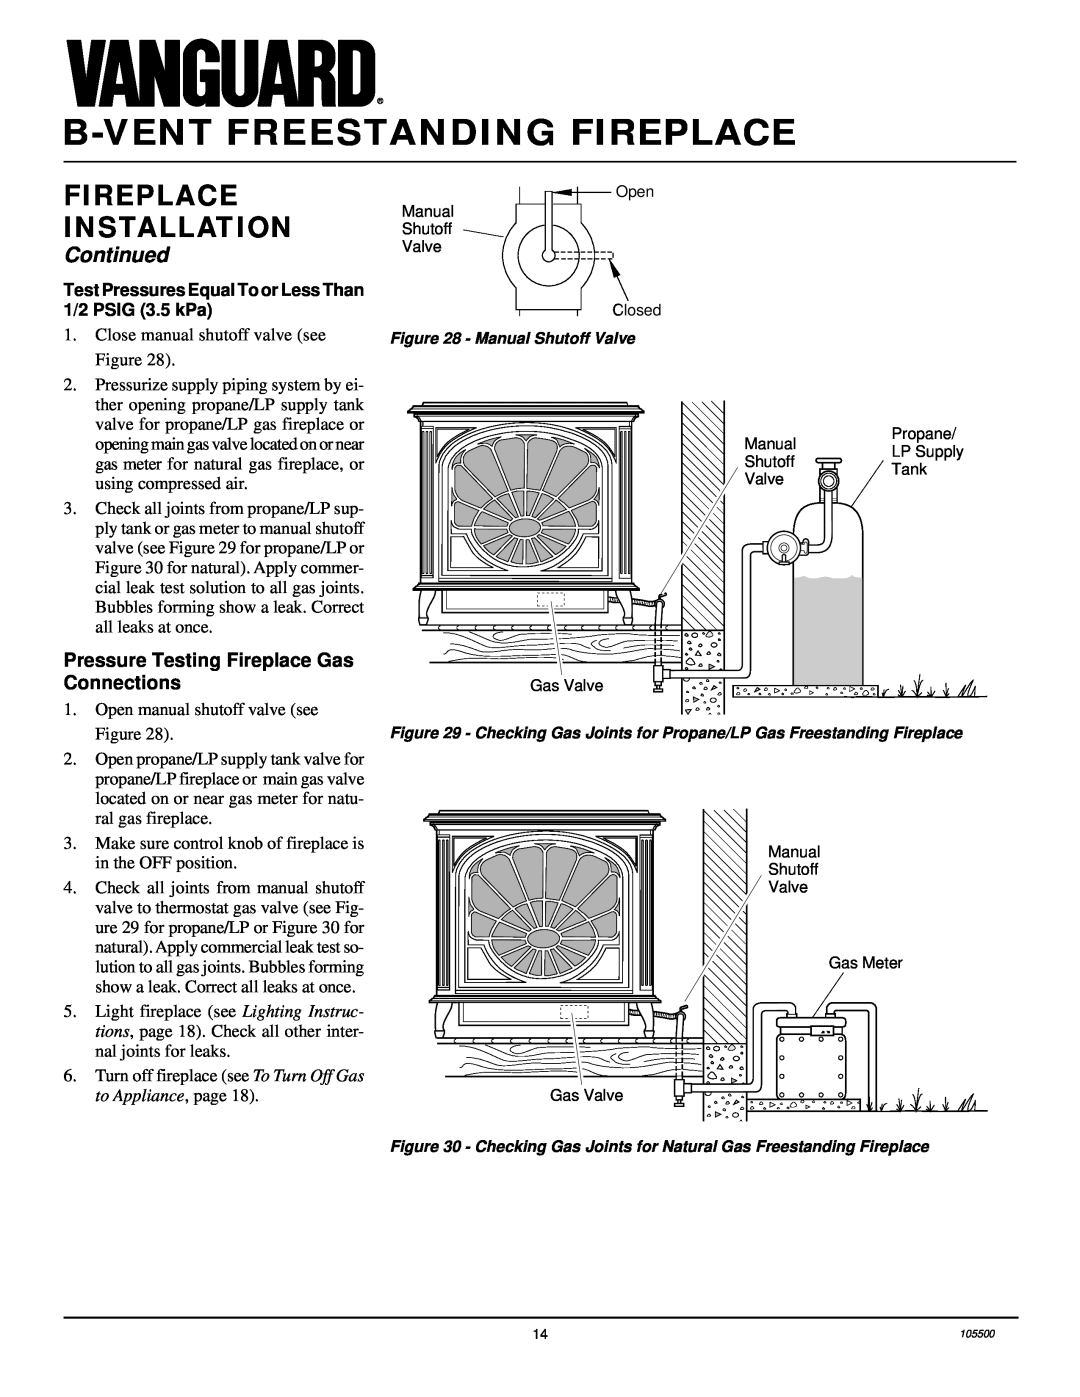 Vanguard Heating SBVBN(A) Pressure Testing Fireplace Gas Connections, to Appliance, page, B-Ventfreestanding Fireplace 